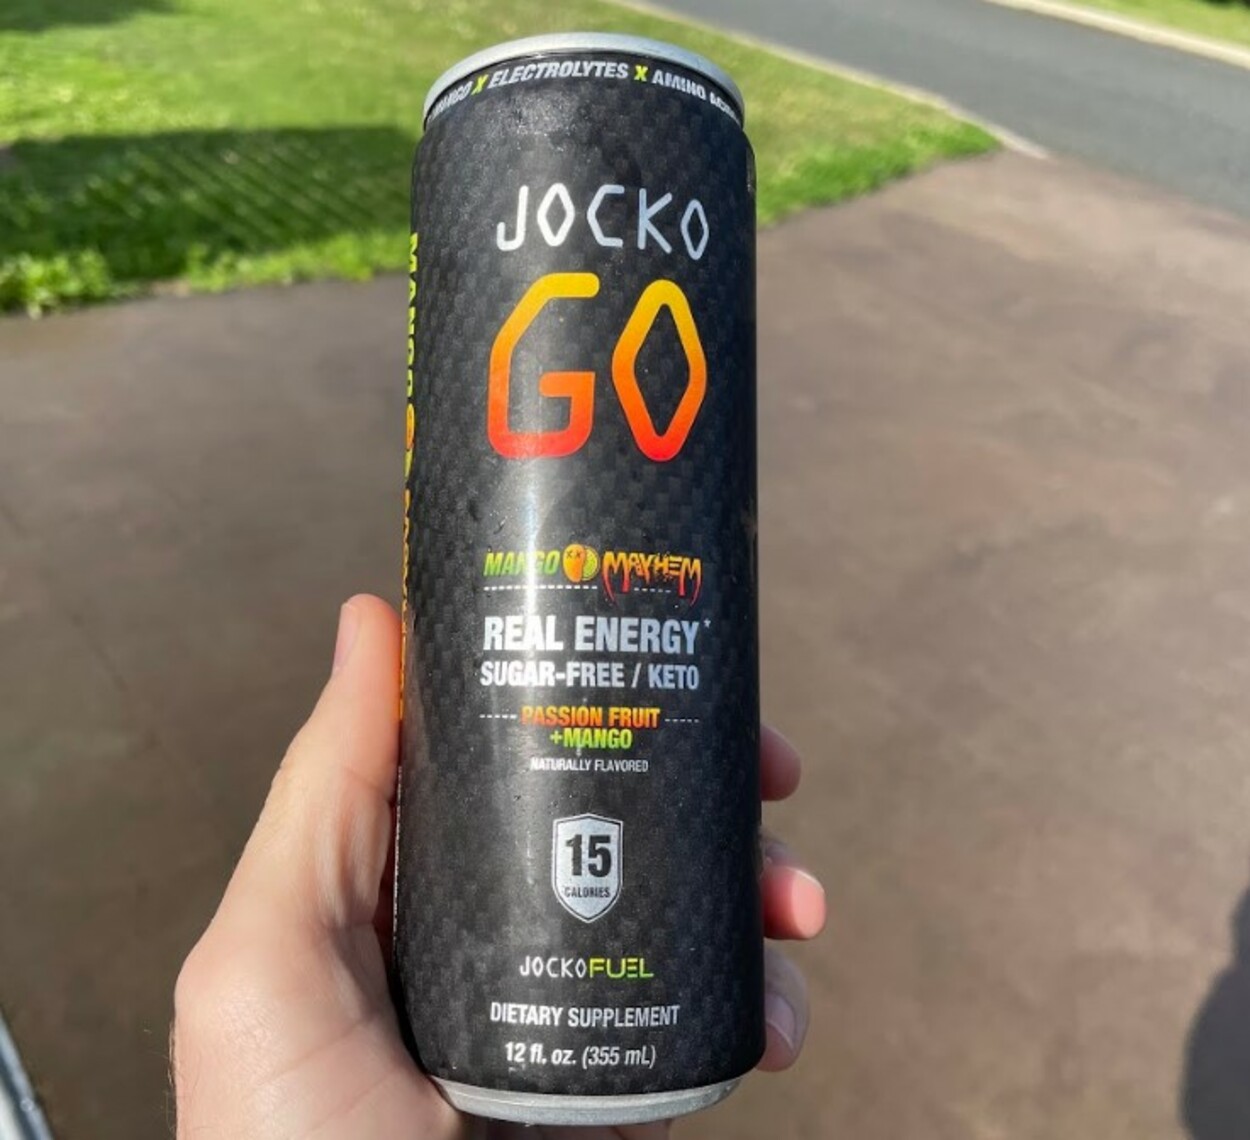 a can of Jocko Go in someone's hands